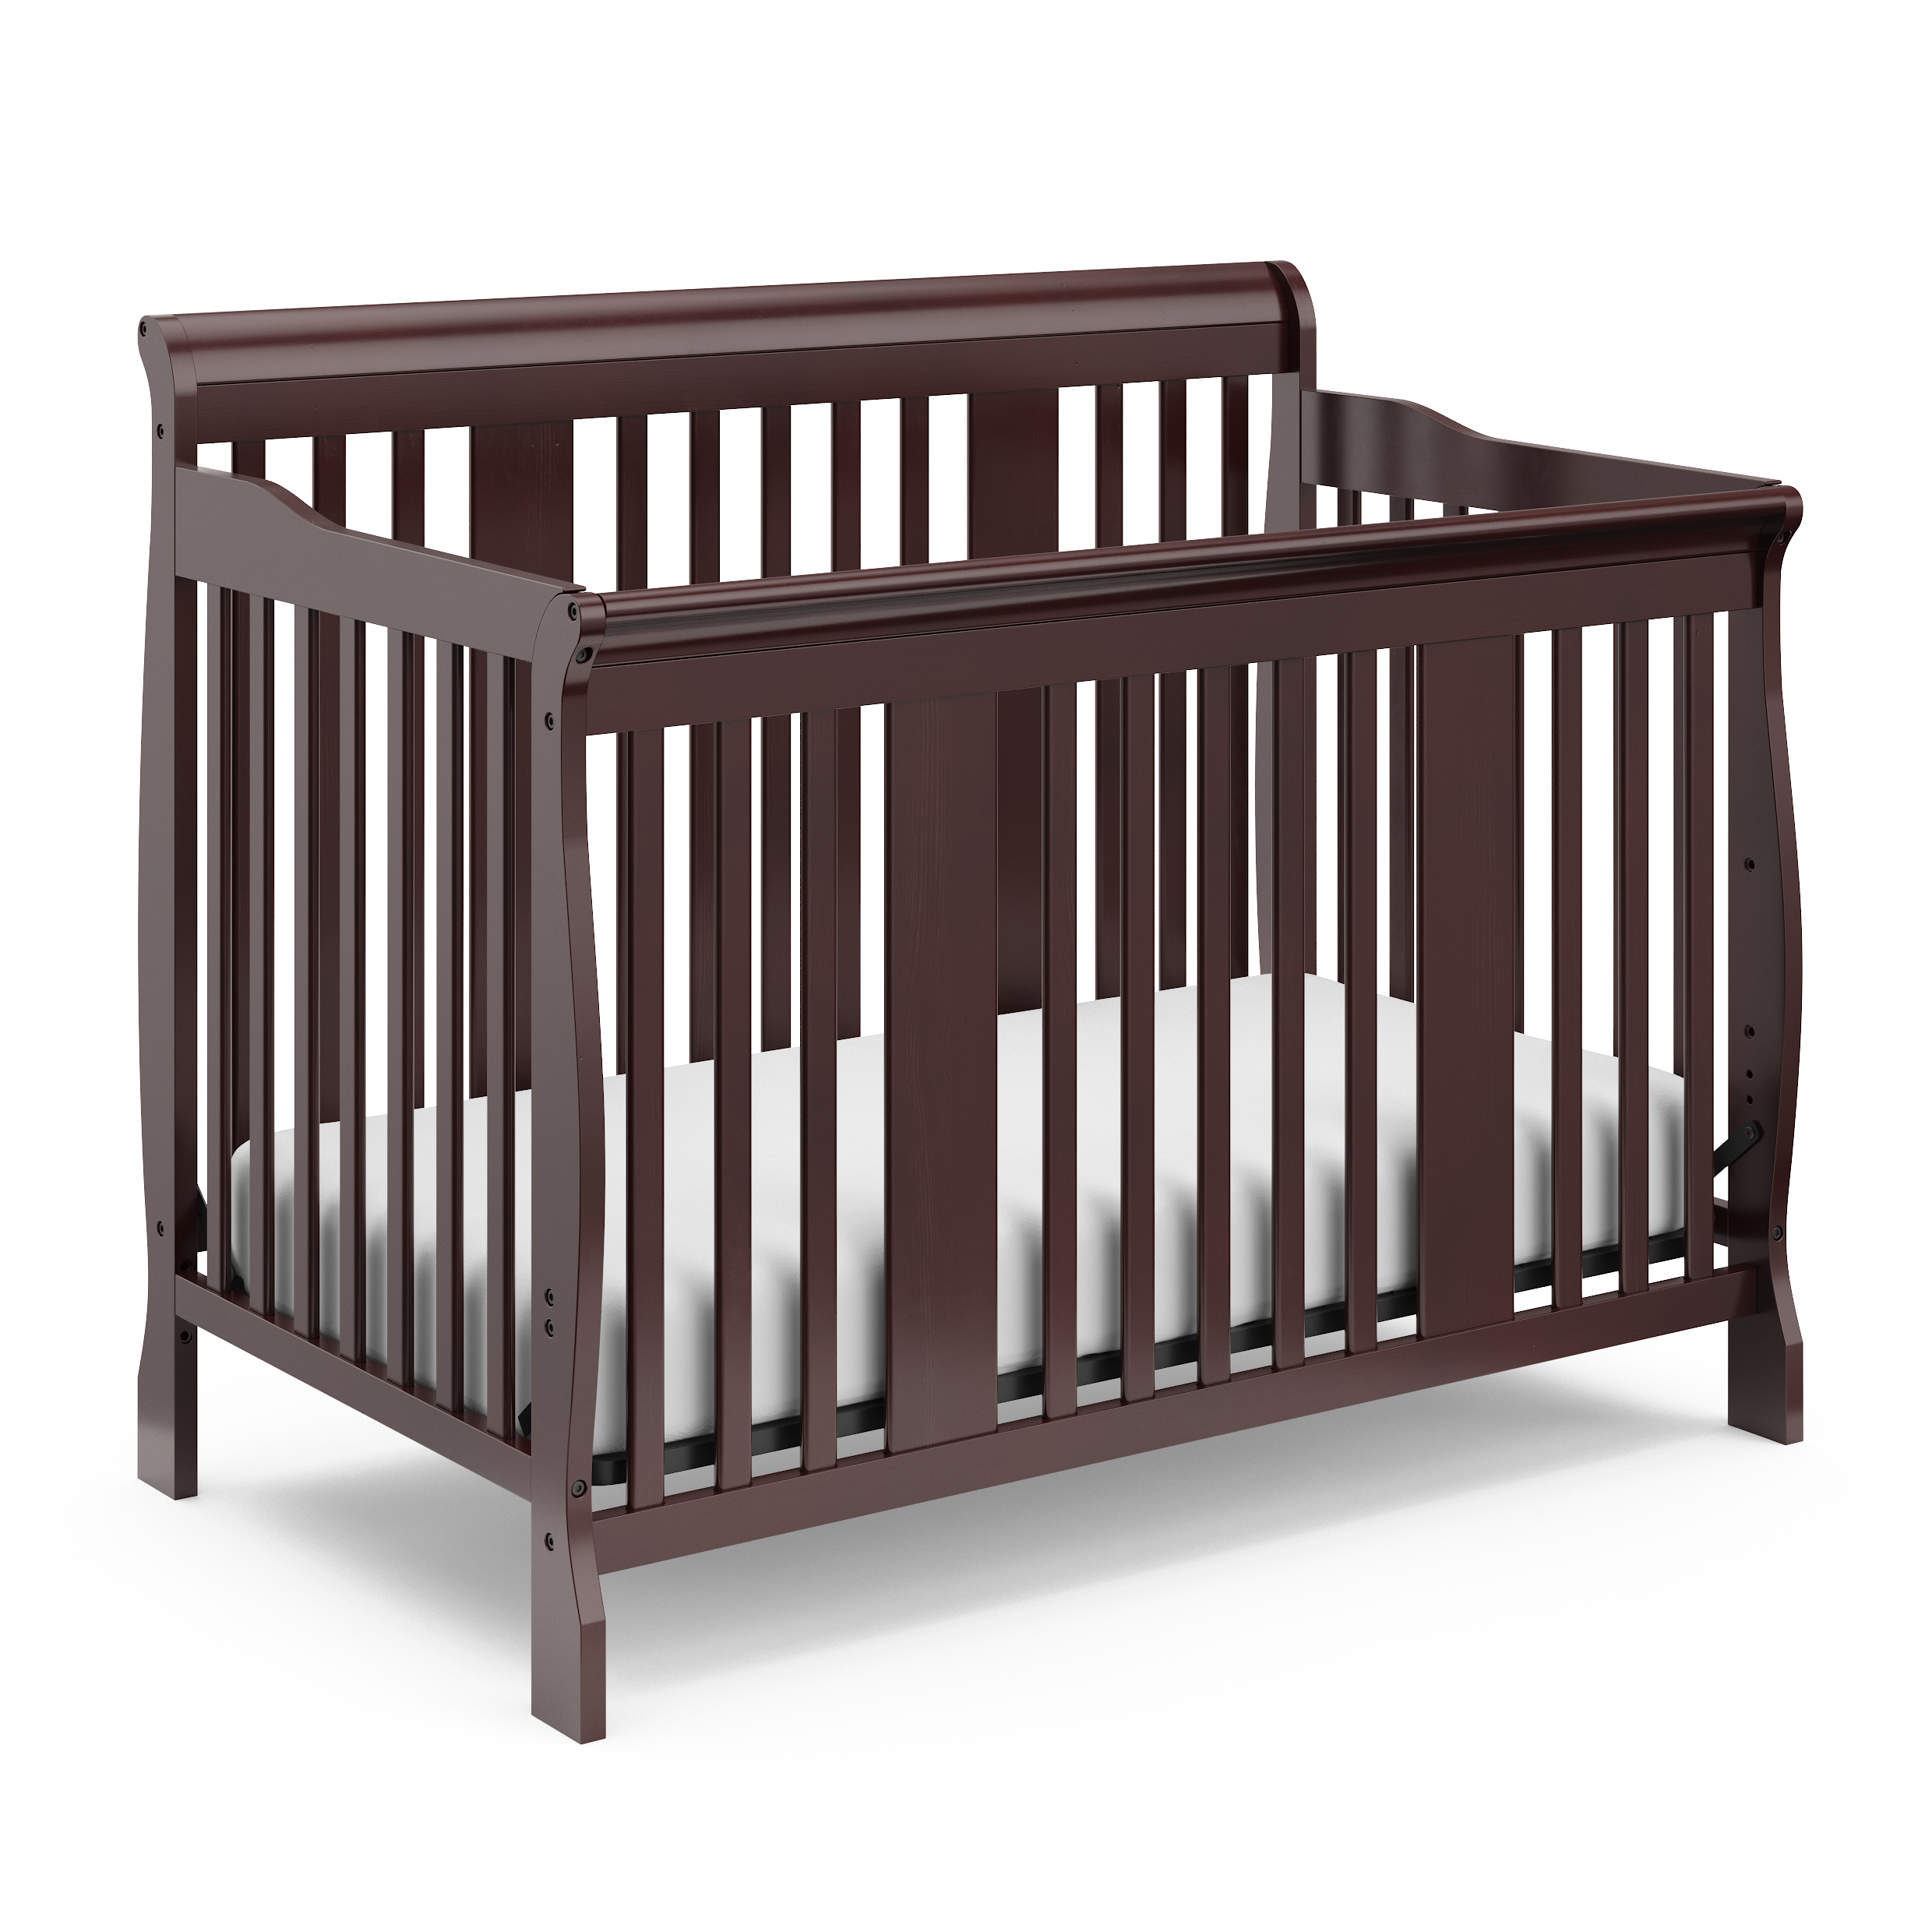 Storkcraft Tuscany 4-in-1 Convertible Baby Crib Espresso - image 1 of 9